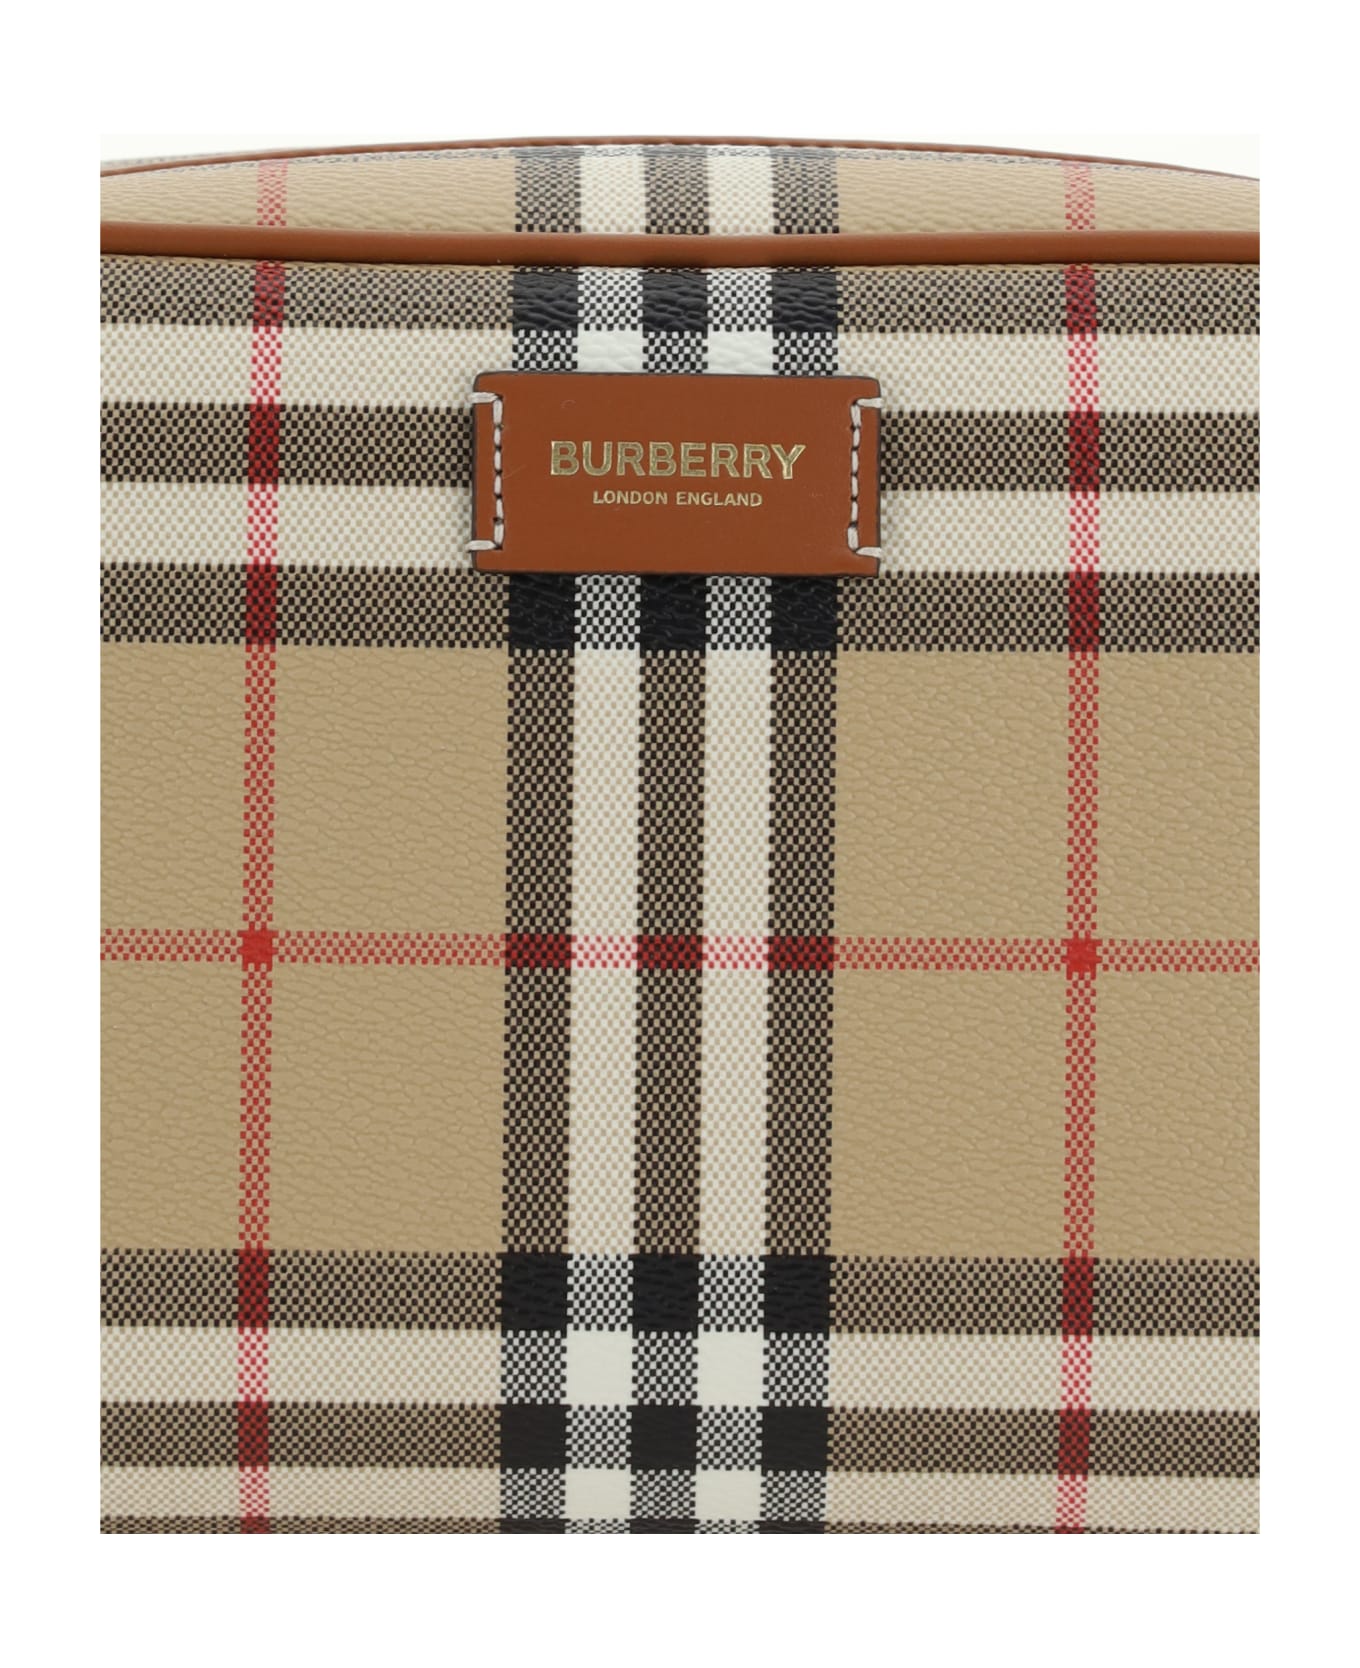 Burberry Cosmetic Pouch - Archive Beige